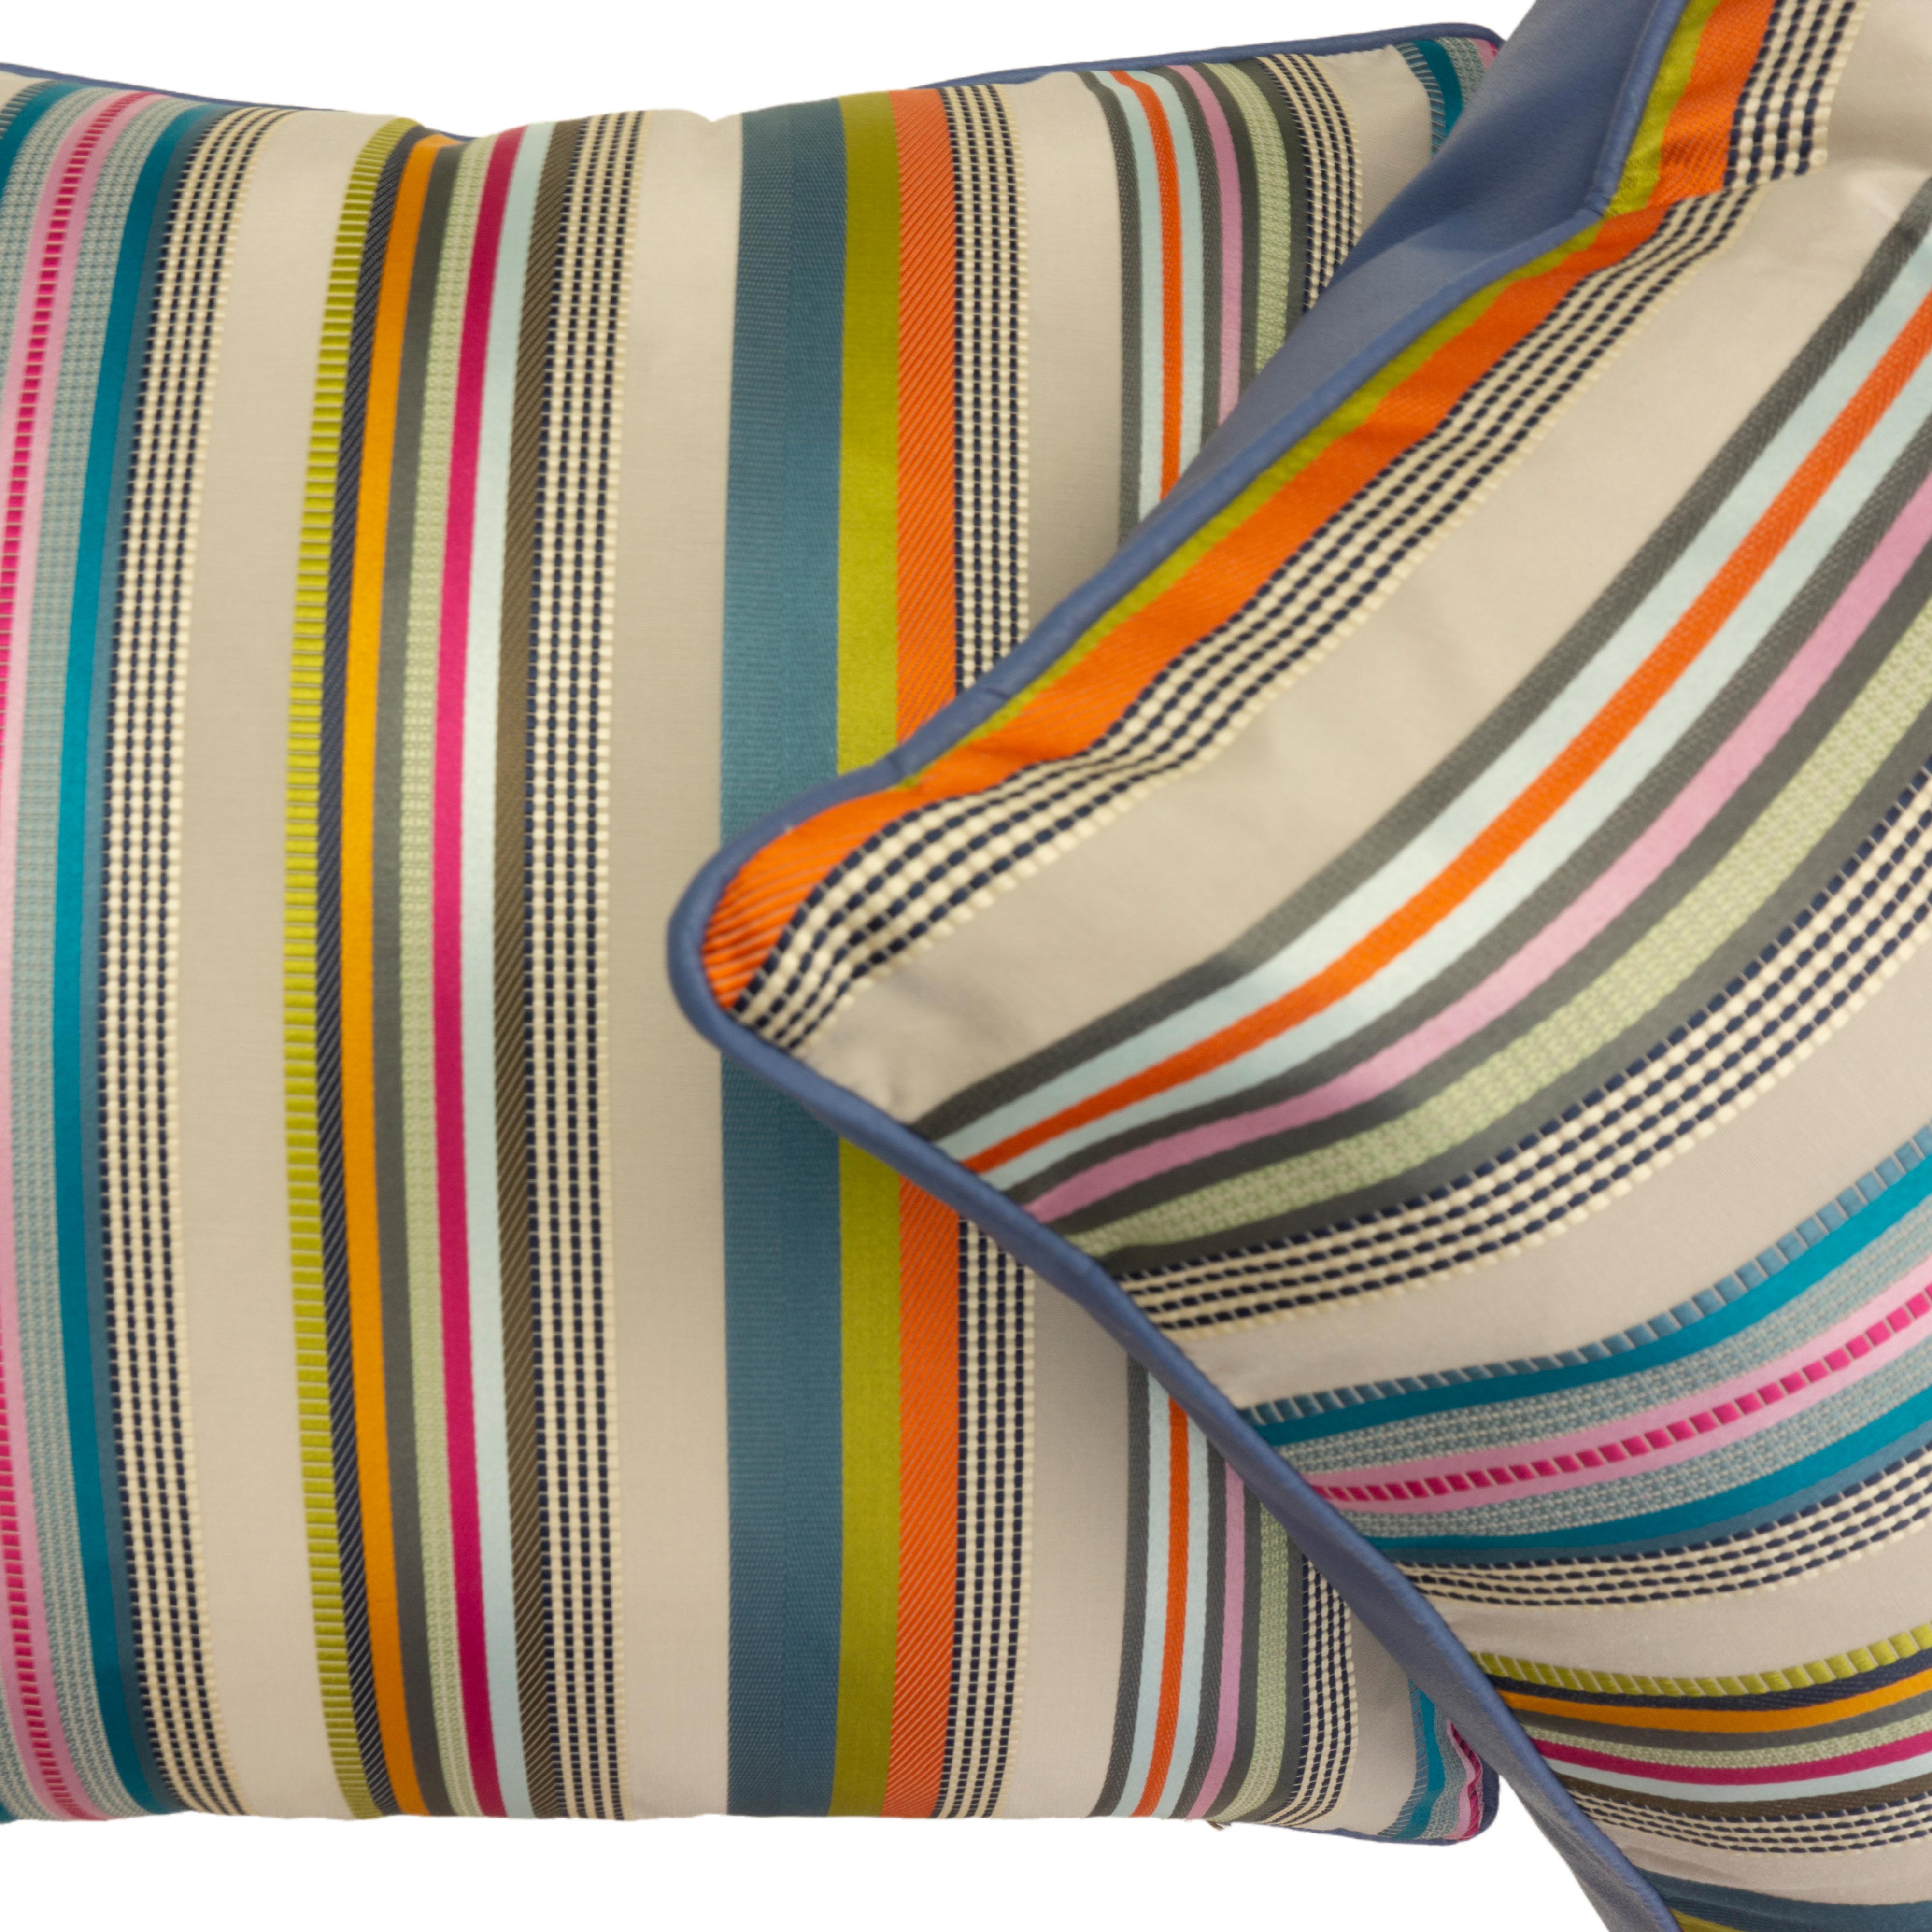 Contemporary Throw Pillows with Colorful Satin Stripes